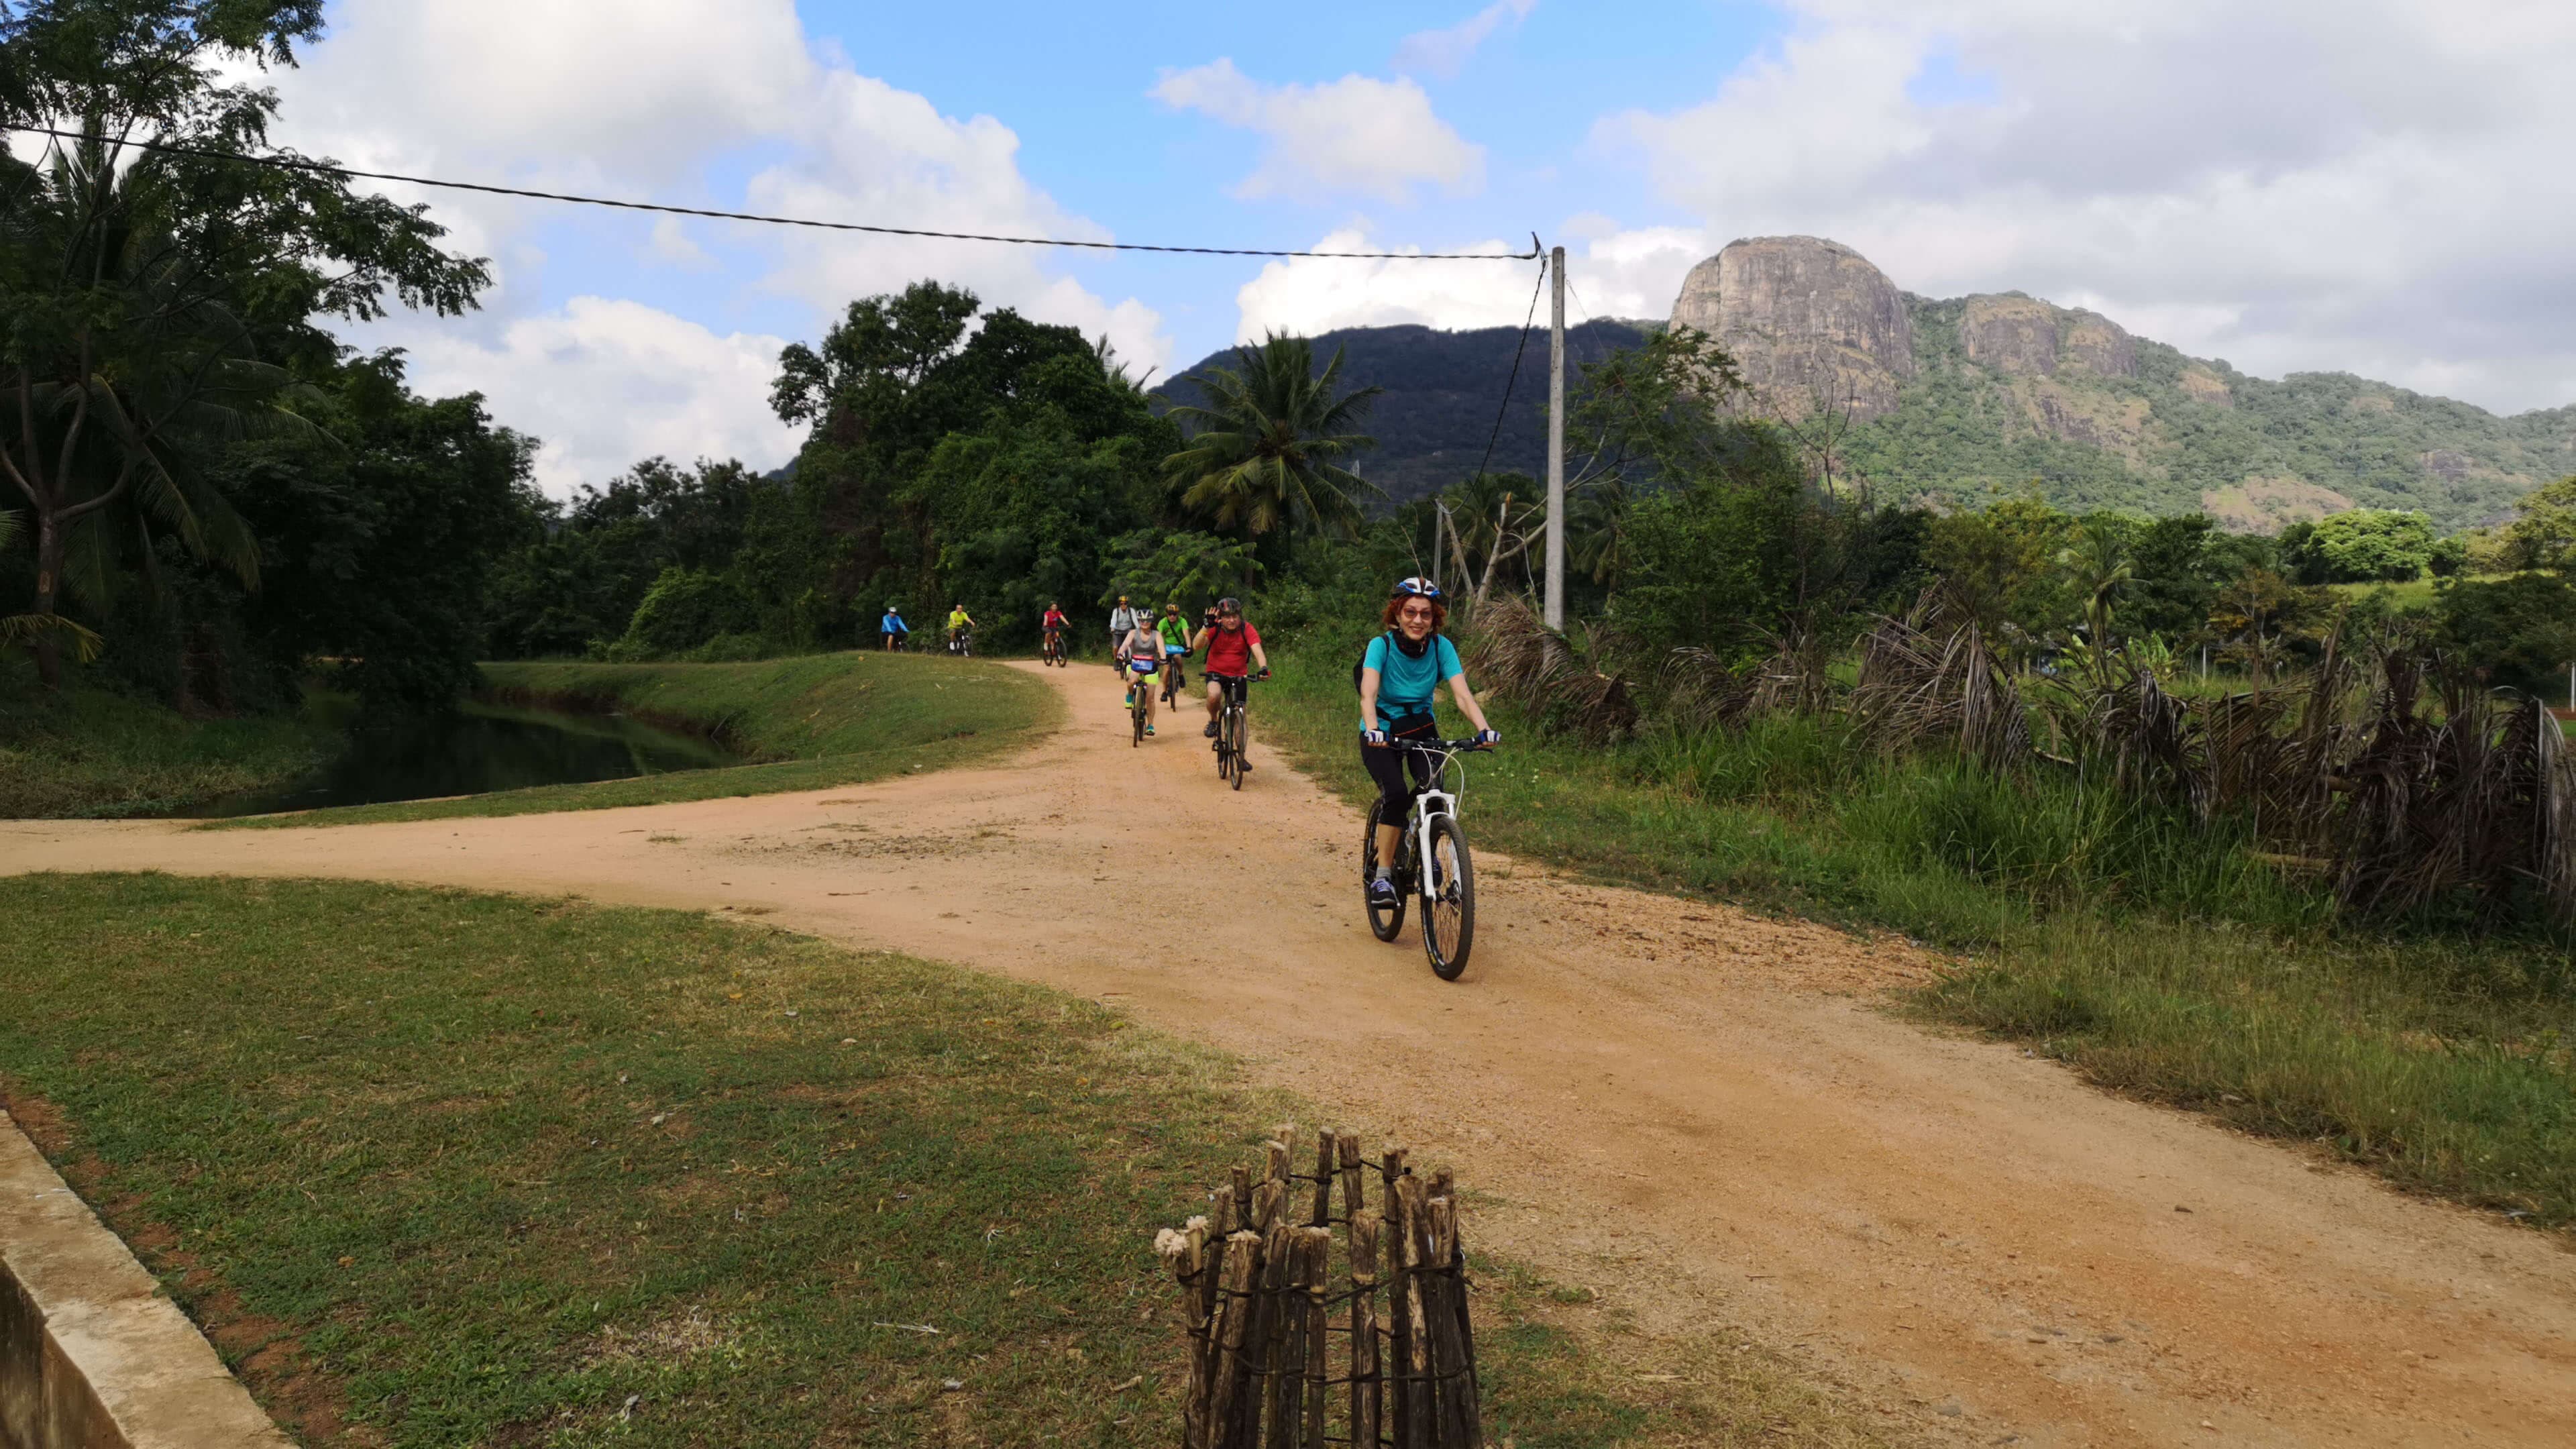 A picture of cycling the cyclists exploring wilderness and nature in Polonnaruwa Sri Lanka